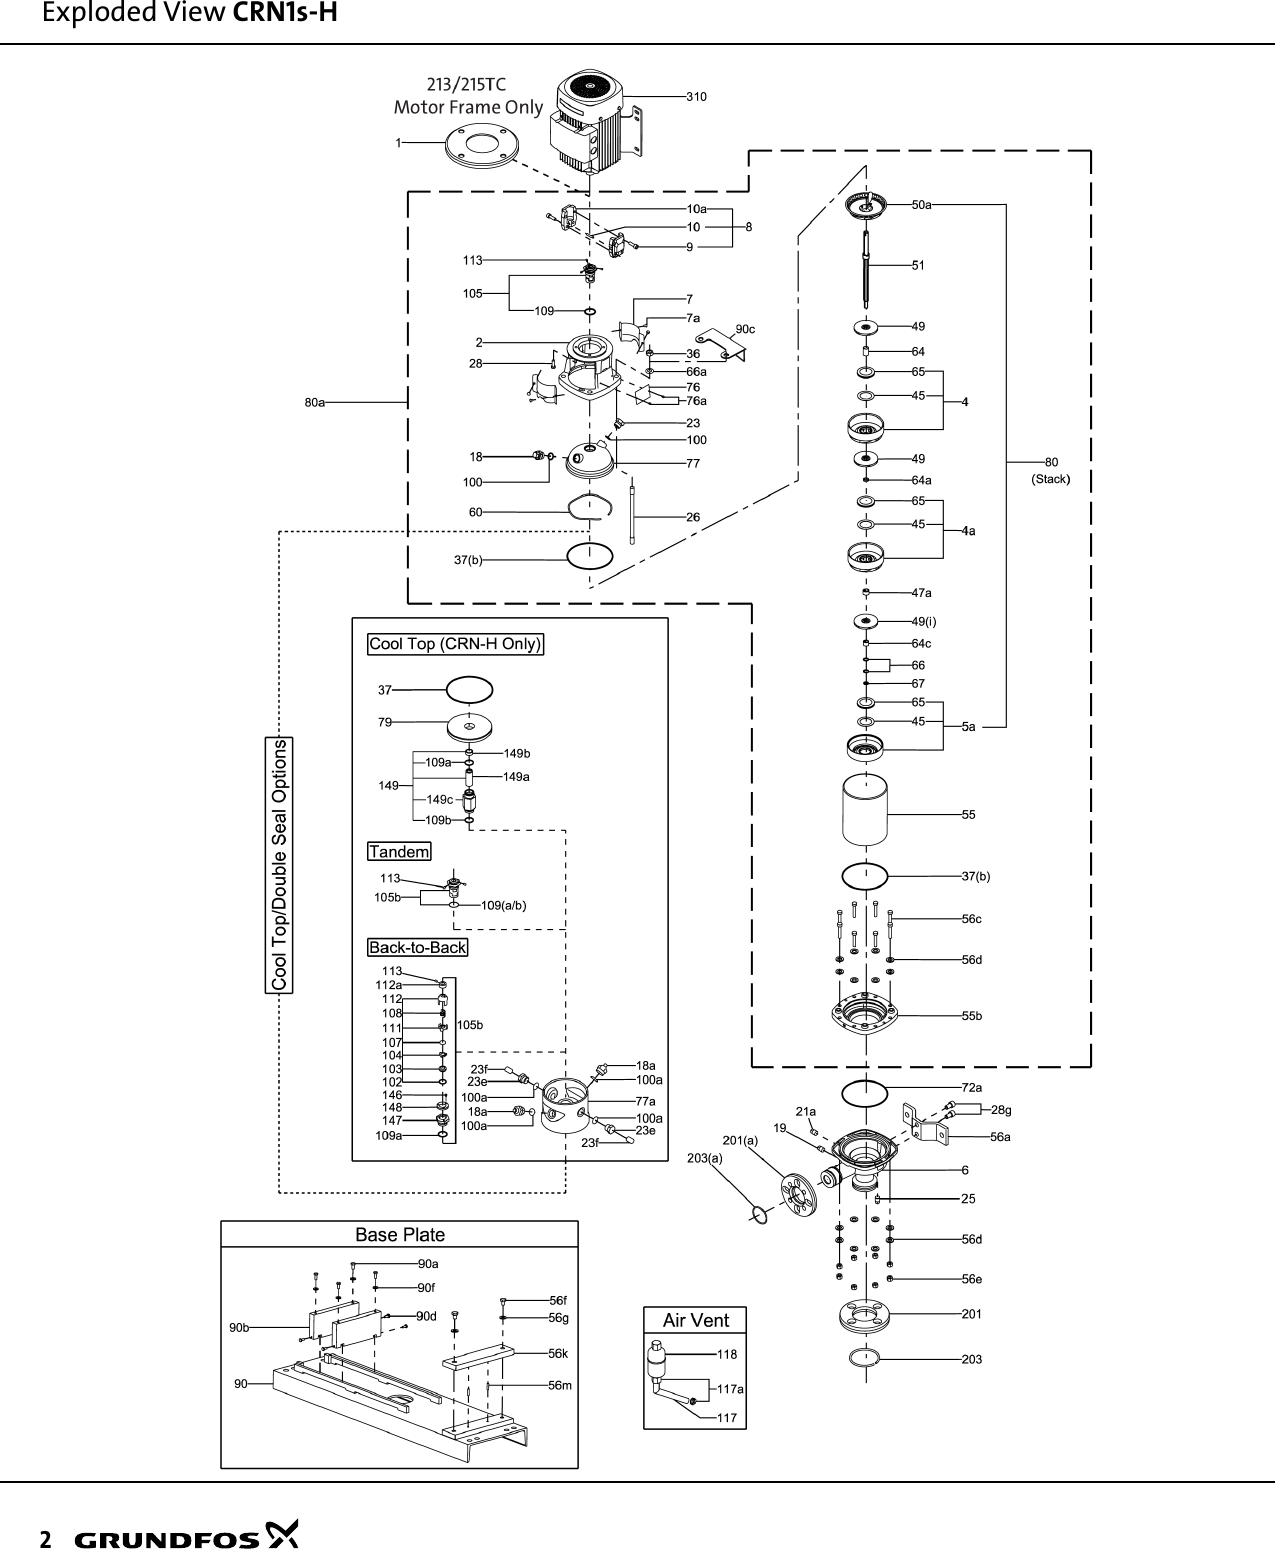 Page 2 of 12 - 548293 1 Grundfos CR Replacement Parts List